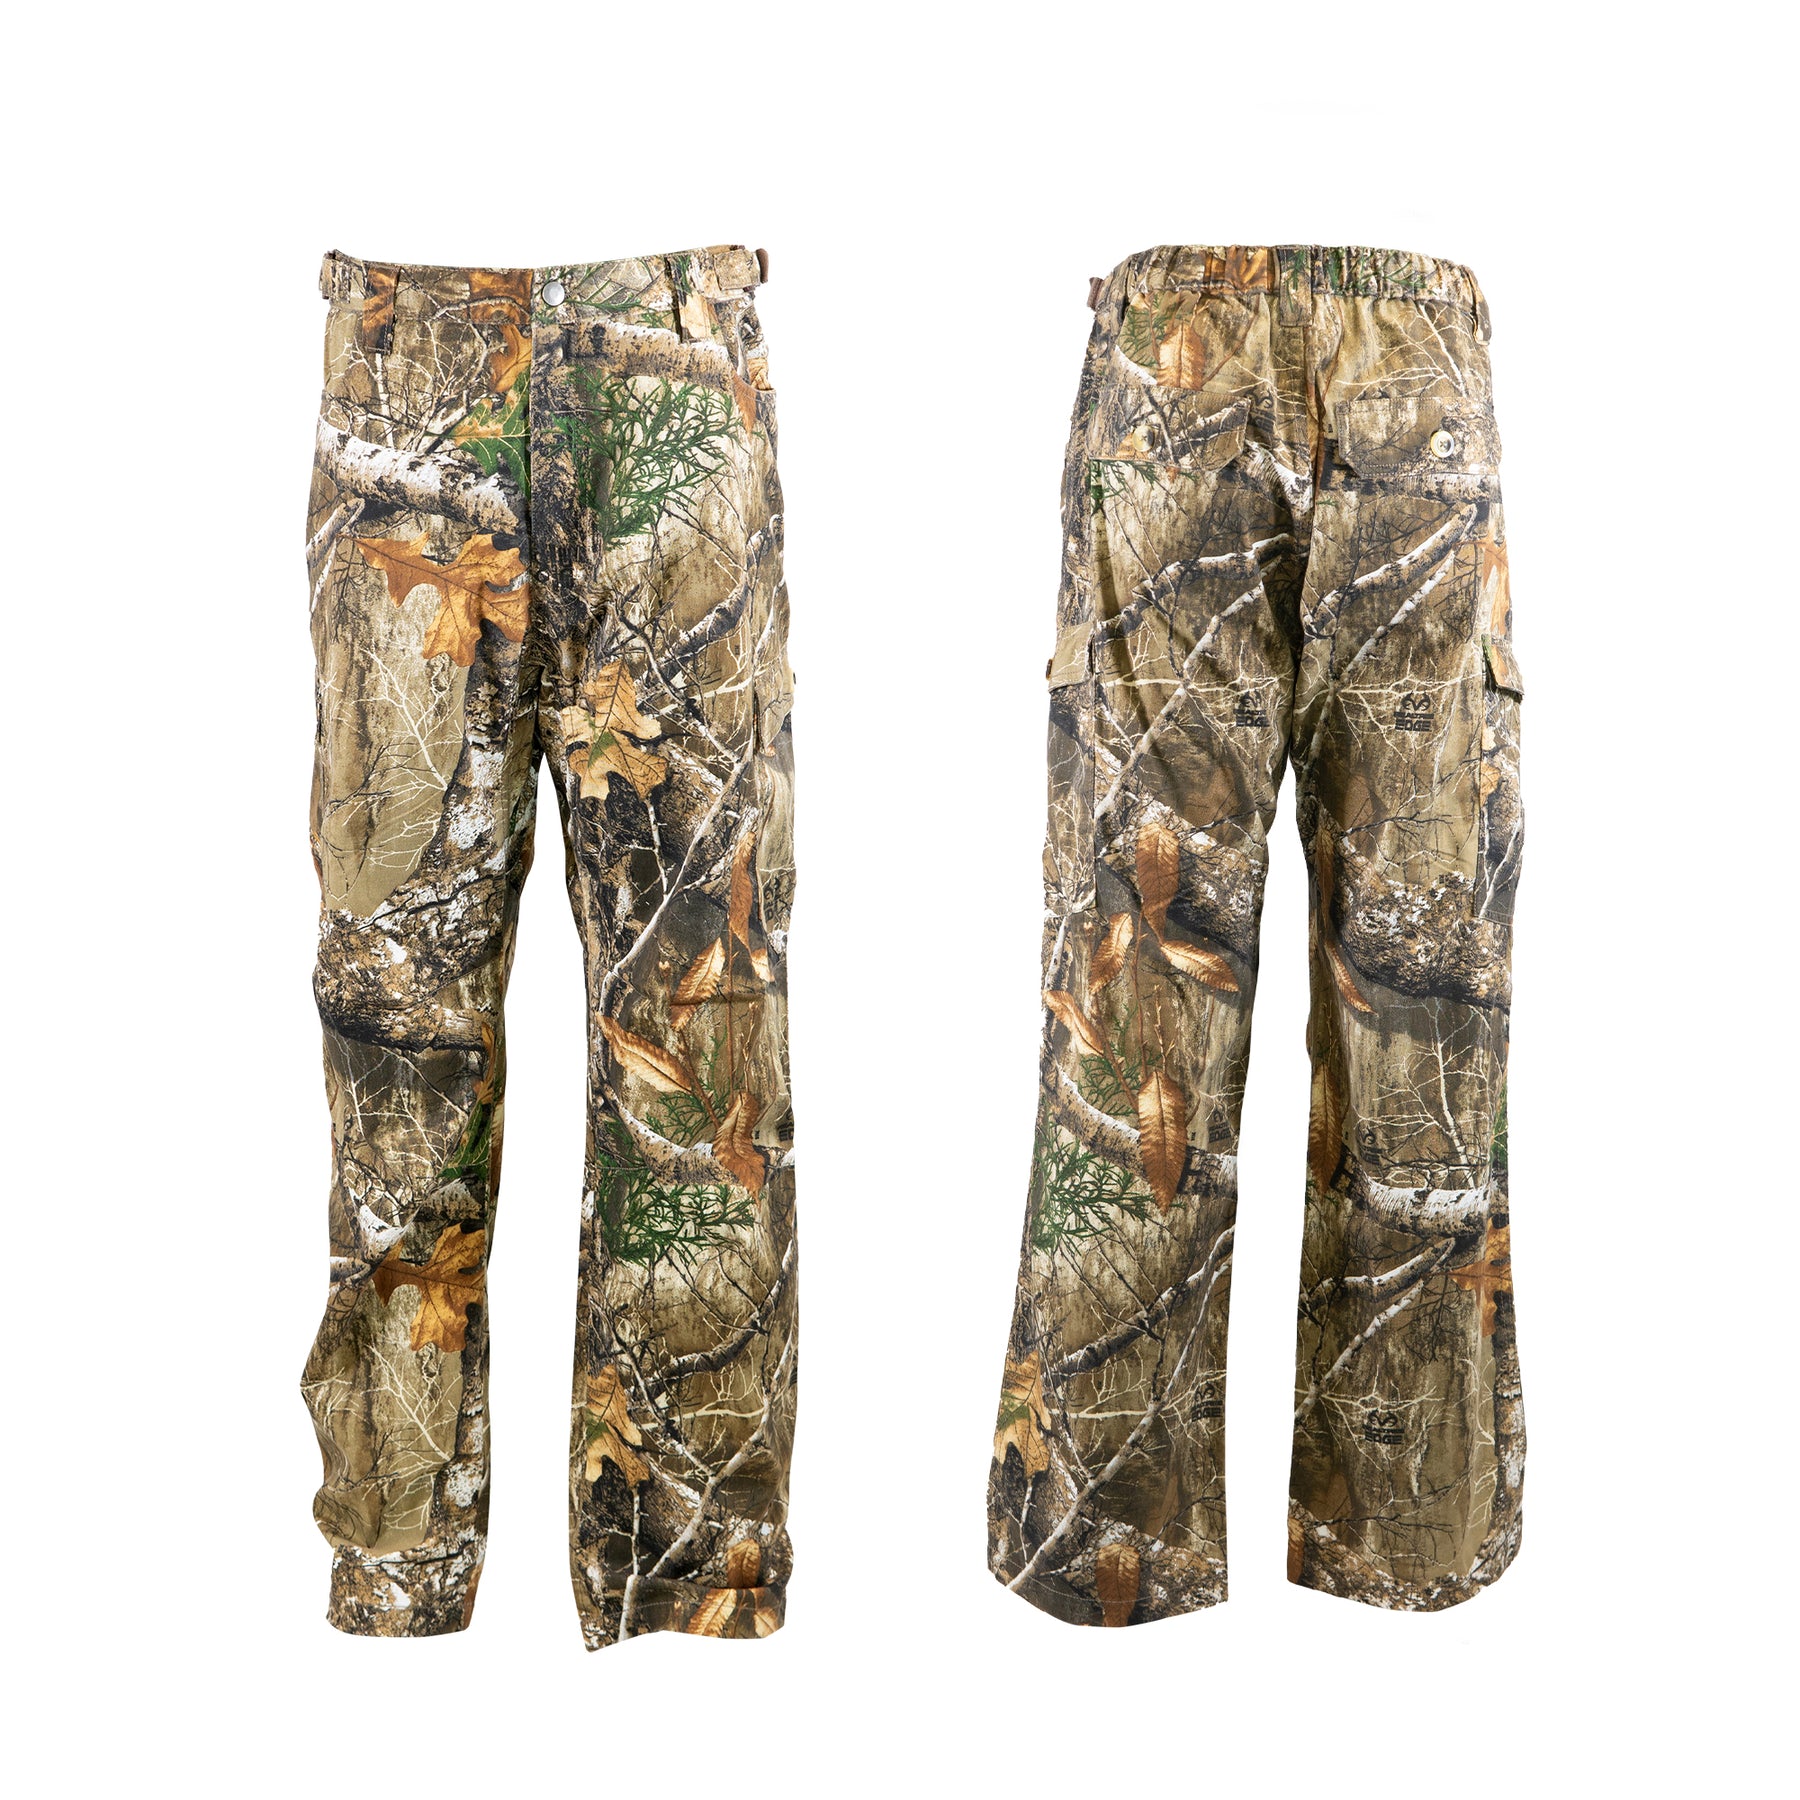 Hot Shot Mens Camo Performance Pant Realtree Edge Hunting Outdoor Apparel, XX-Large, Men's, Size: 2XL